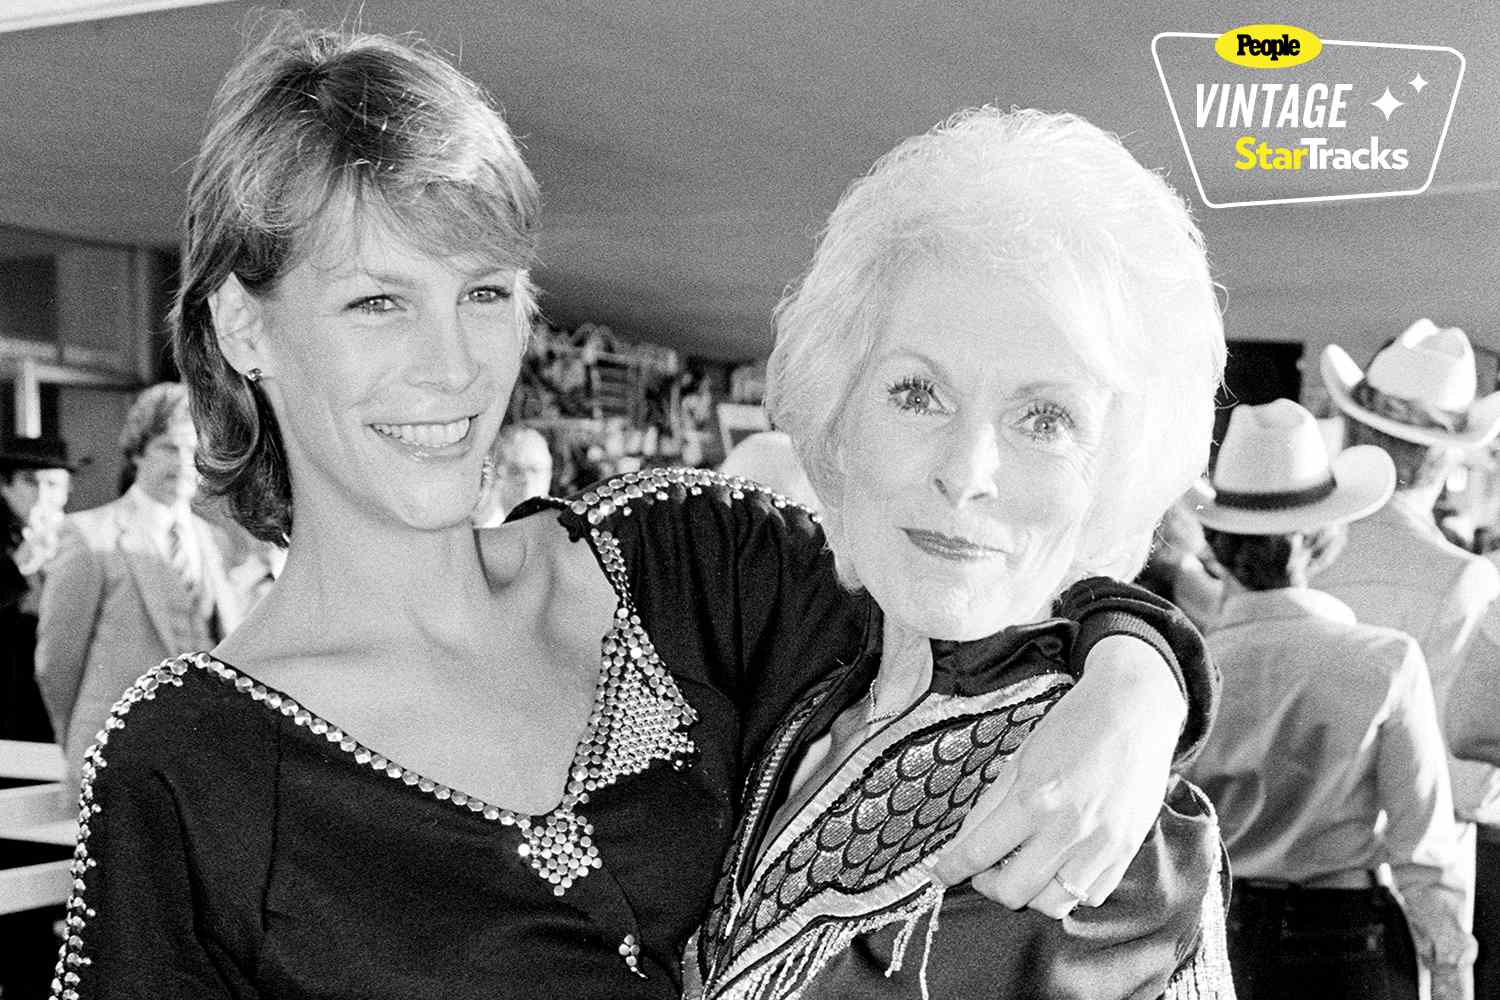 Vintage Star Tracks: This Time in 1981, See Jamie Lee Curtis and Her Mom, Plus More Big Stars